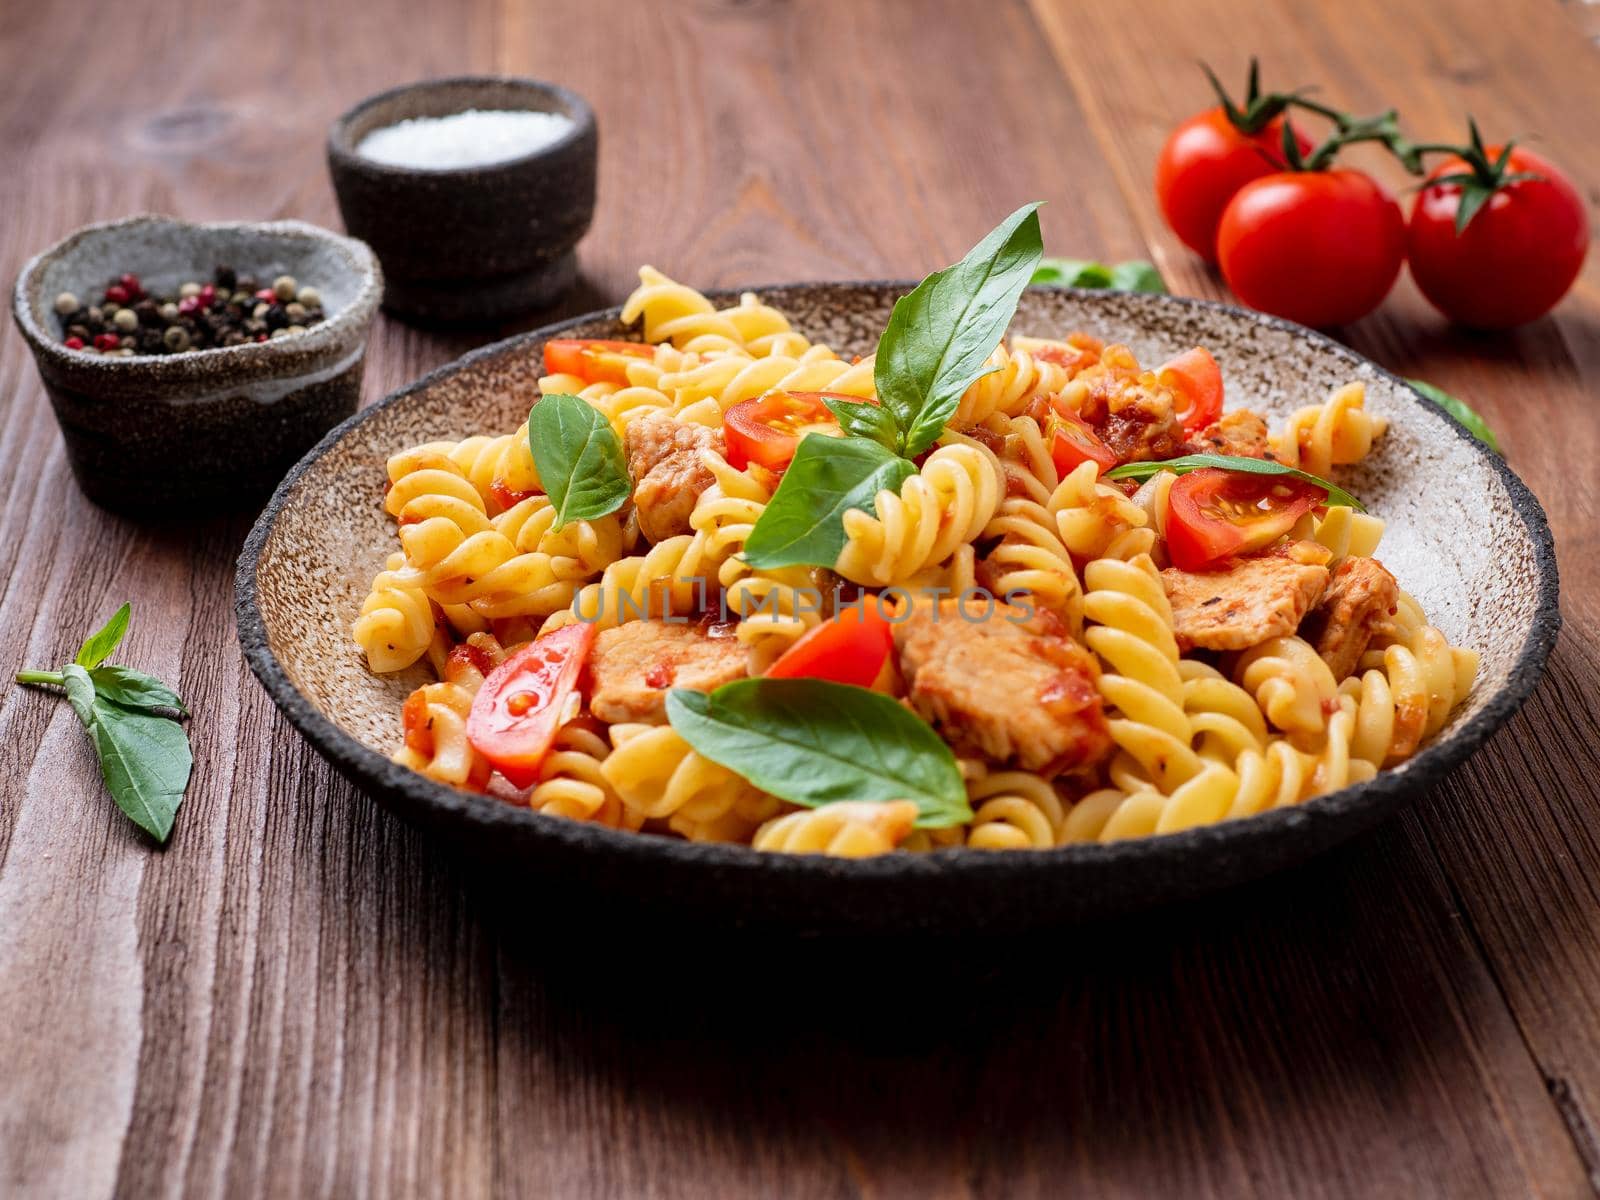 fusilli pasta with tomato sauce, chicken fillet with basil leaves by NataBene